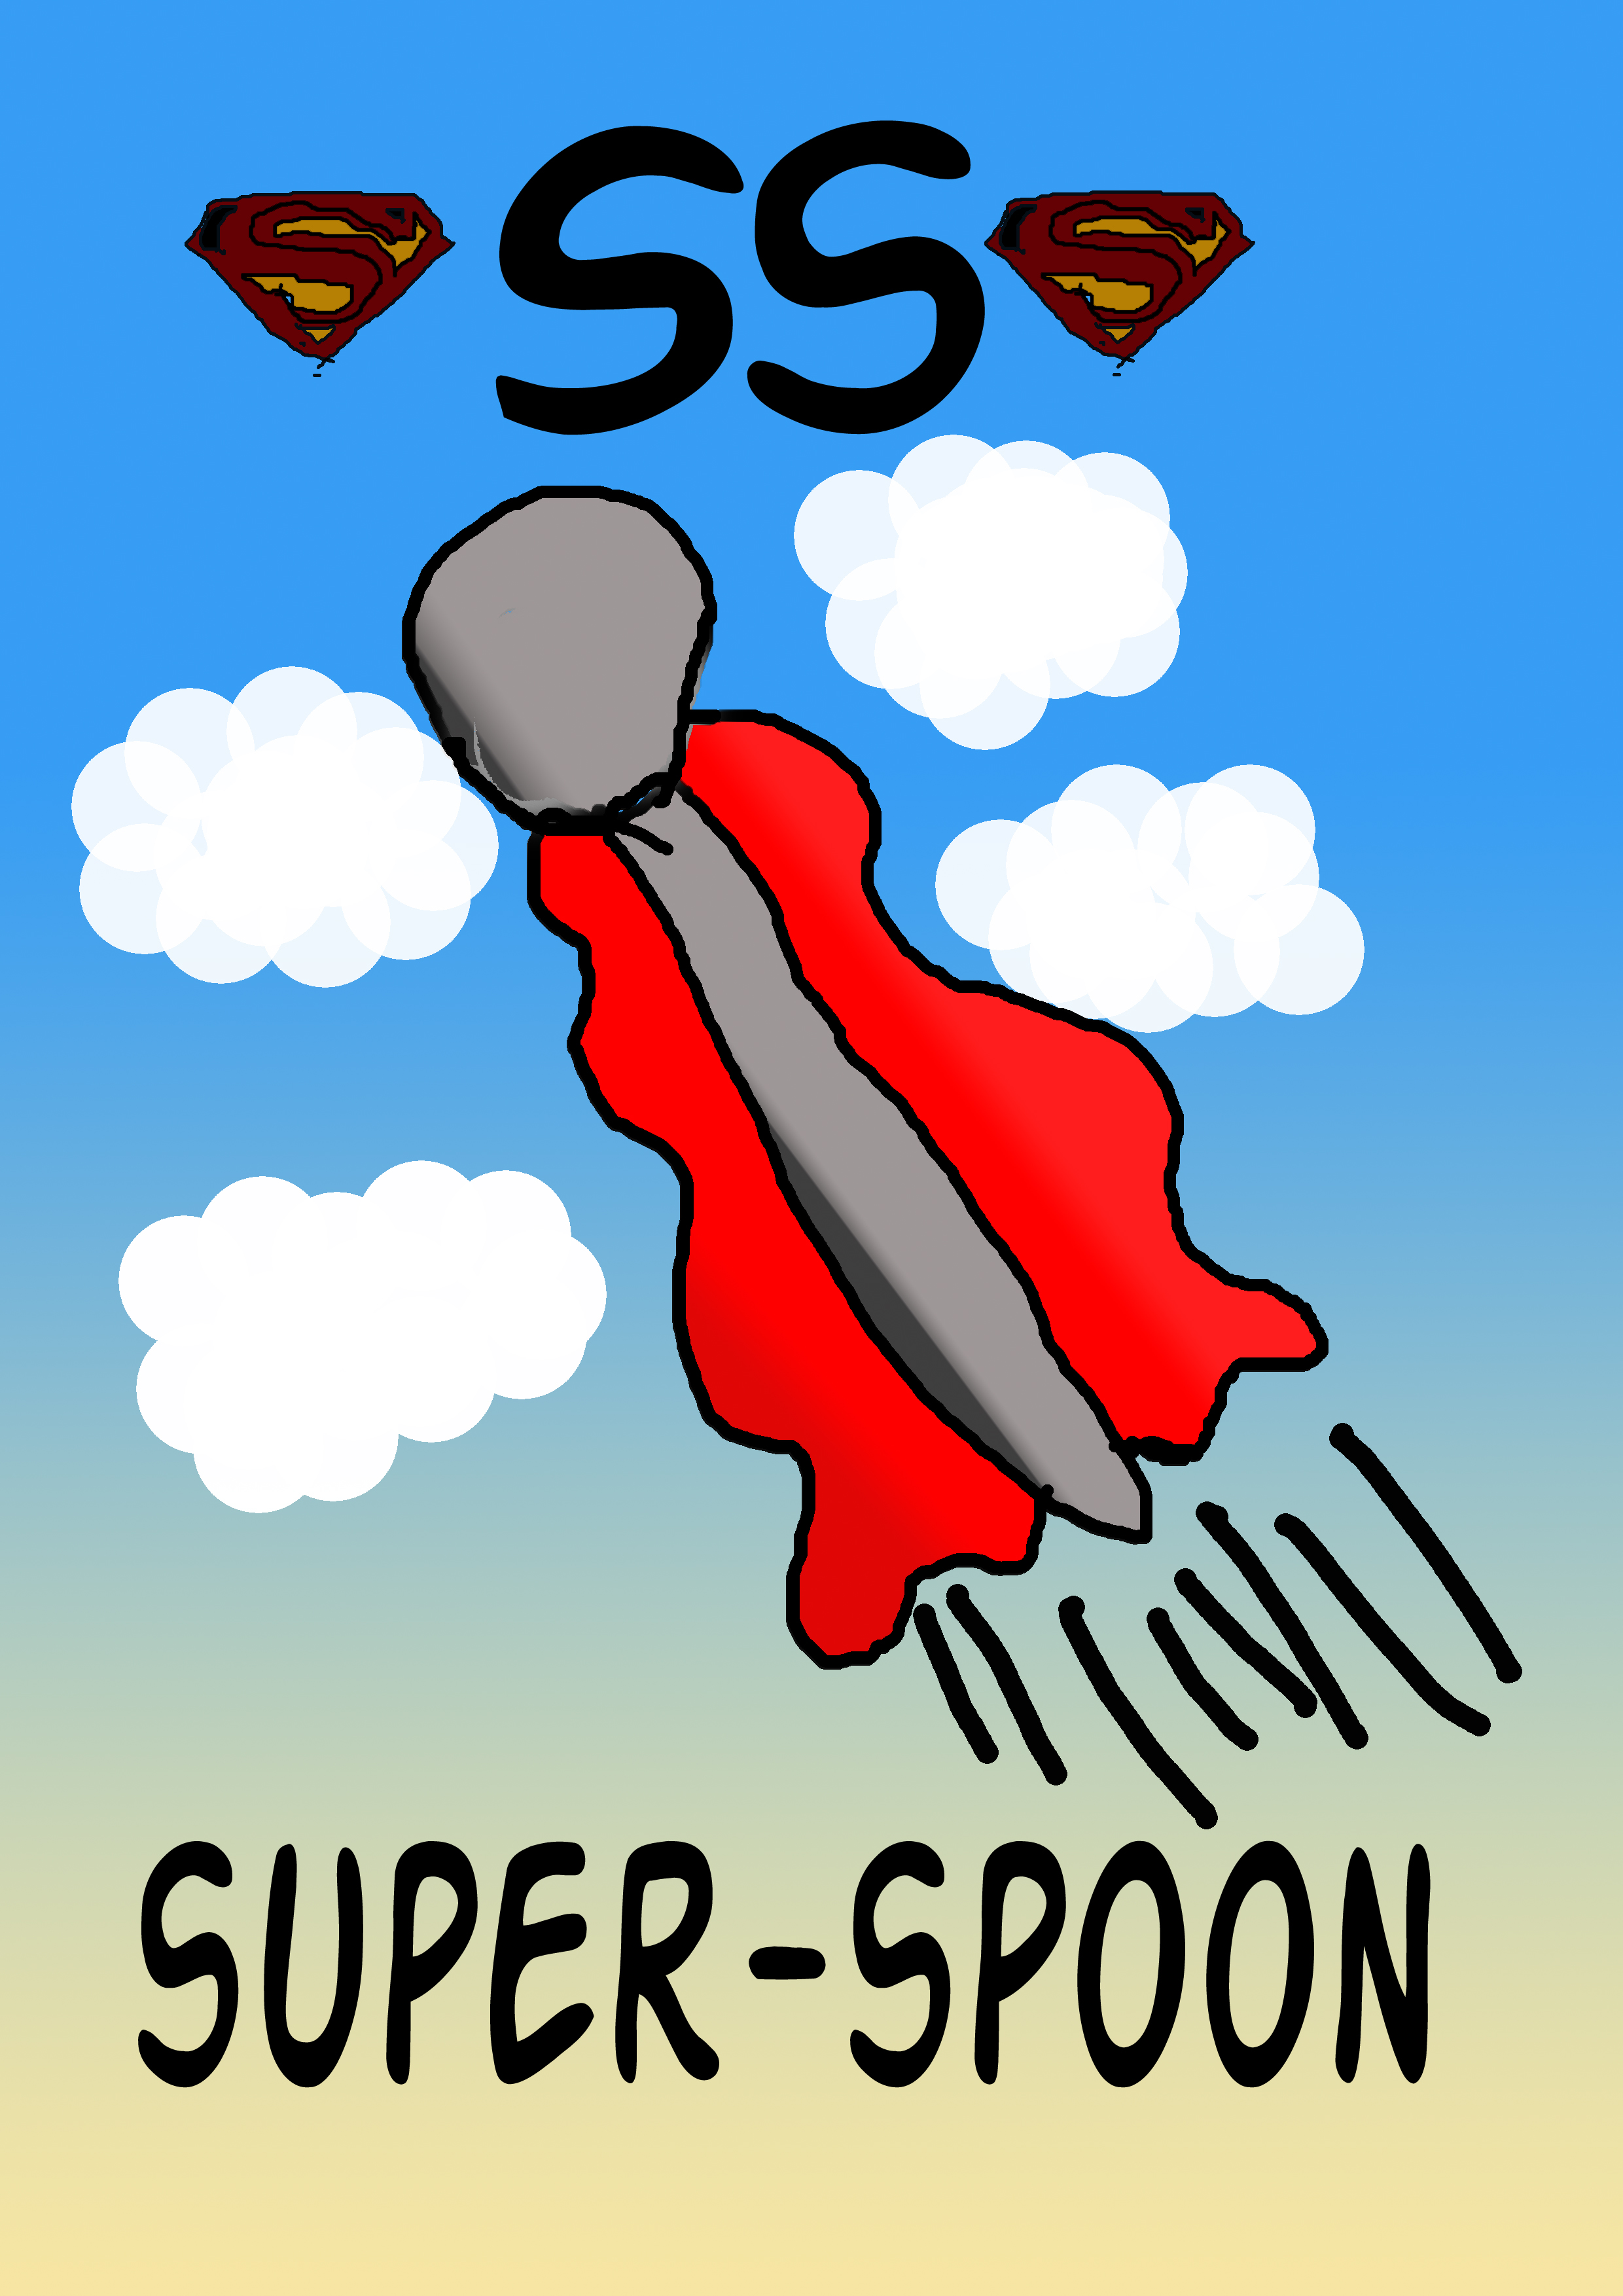 Super spoon,edited for poster, by Spoony111 on DeviantArt